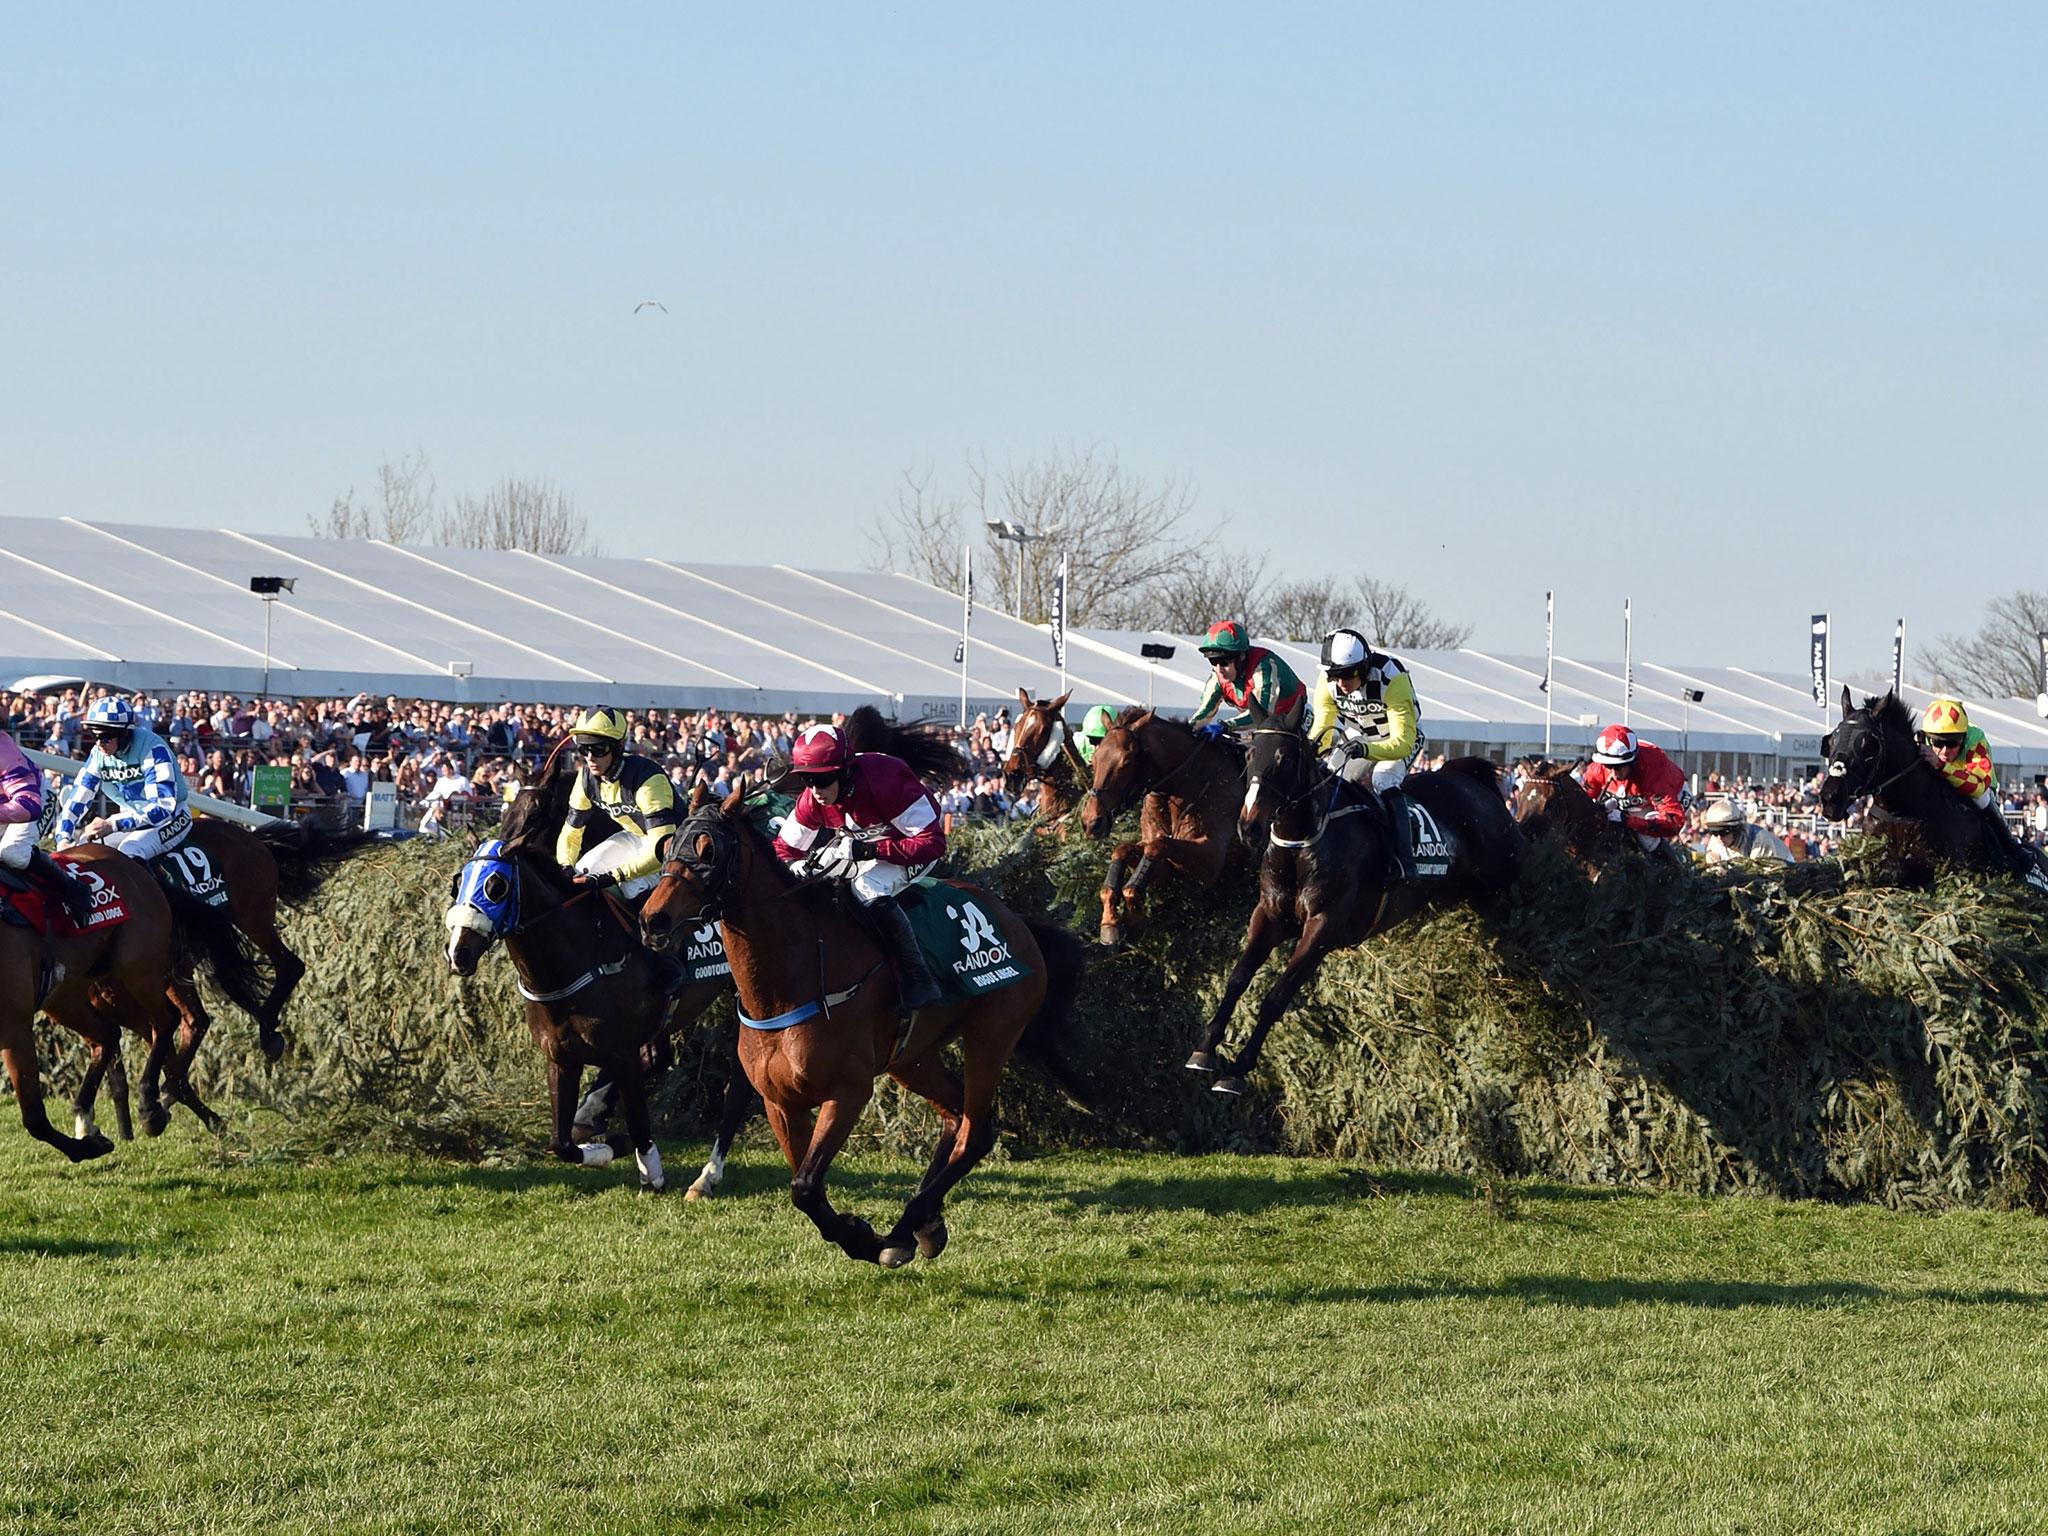 The Grand National returns this Saturday